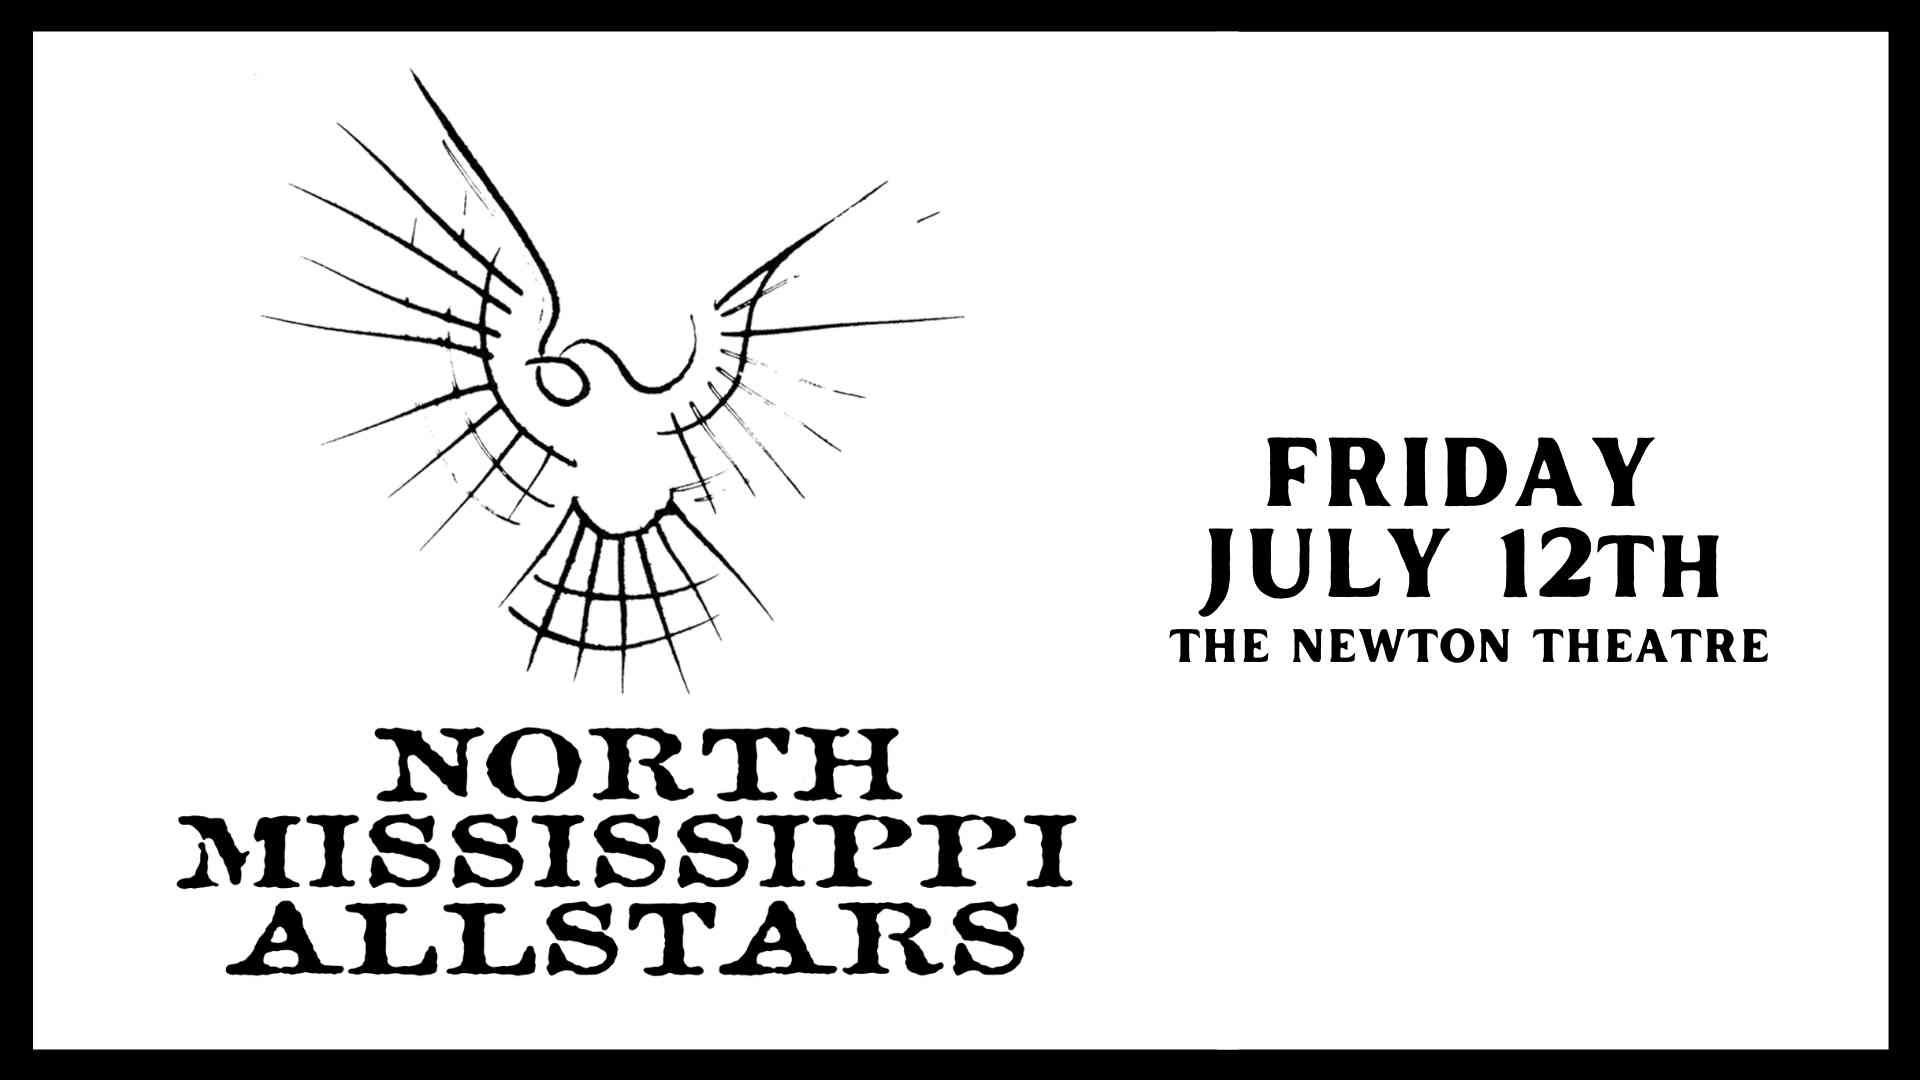 North Mississippi Allstars playing The Newton Theatre on Friday, July 12th